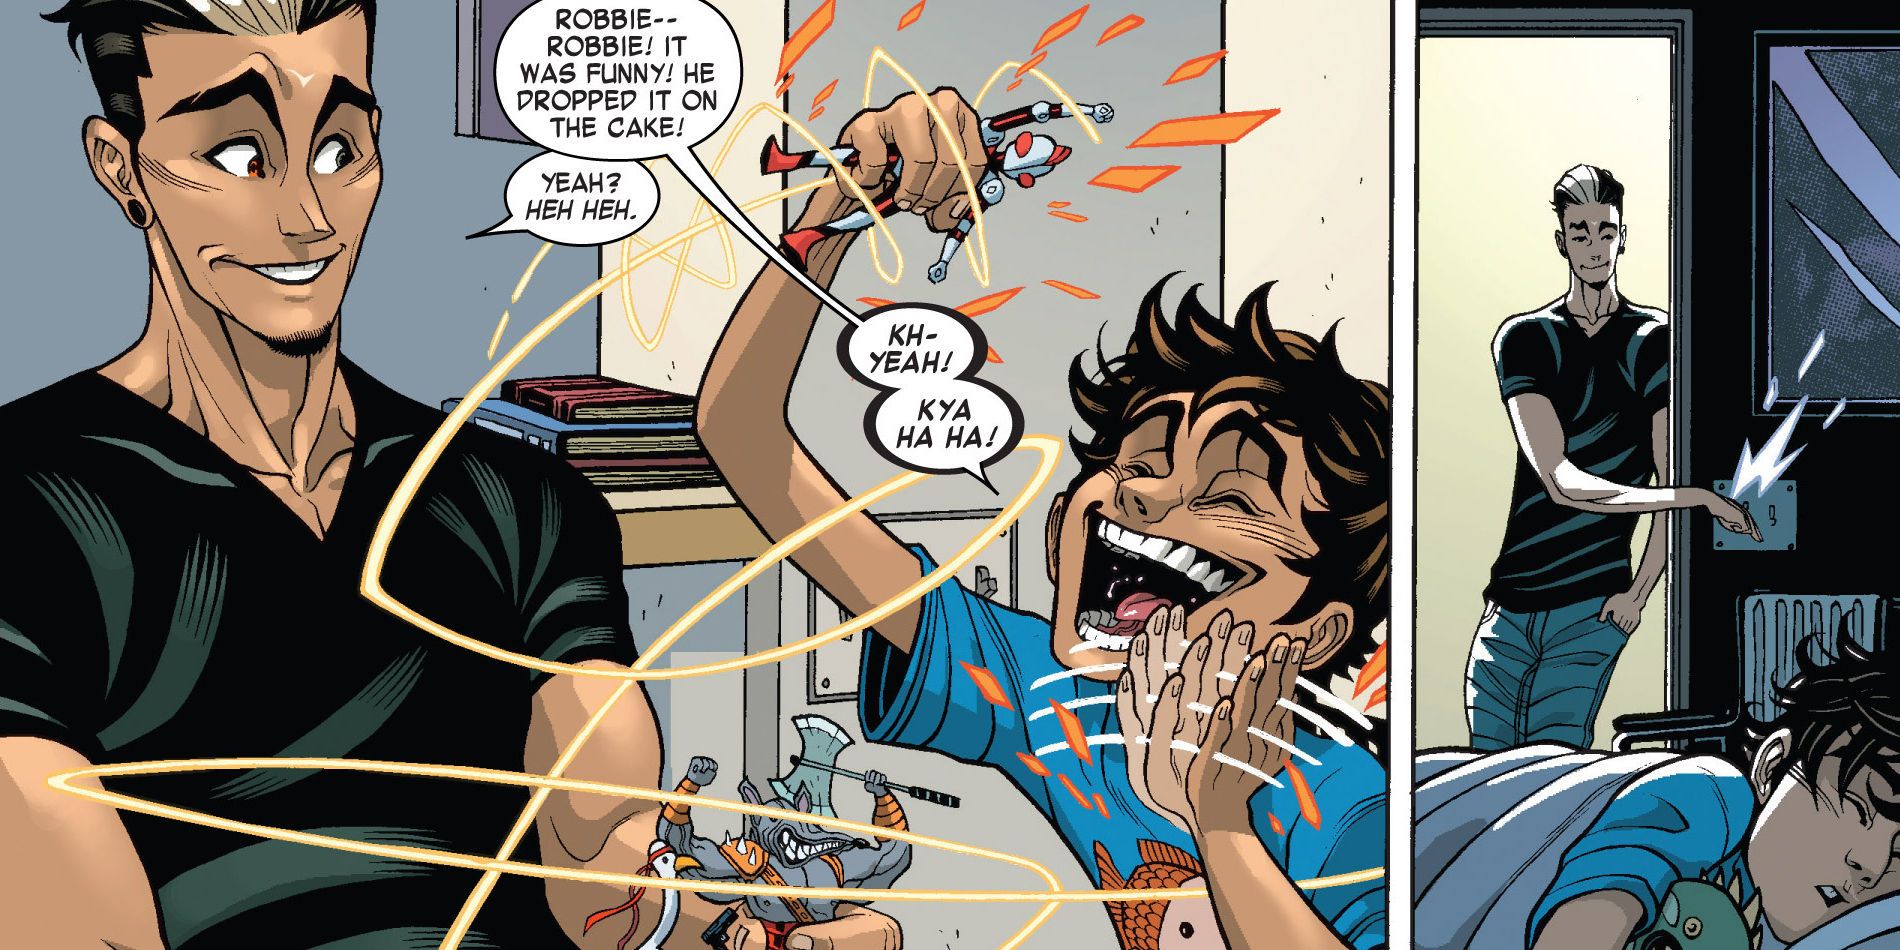 Robbie Reyes and his younger brother Gabe